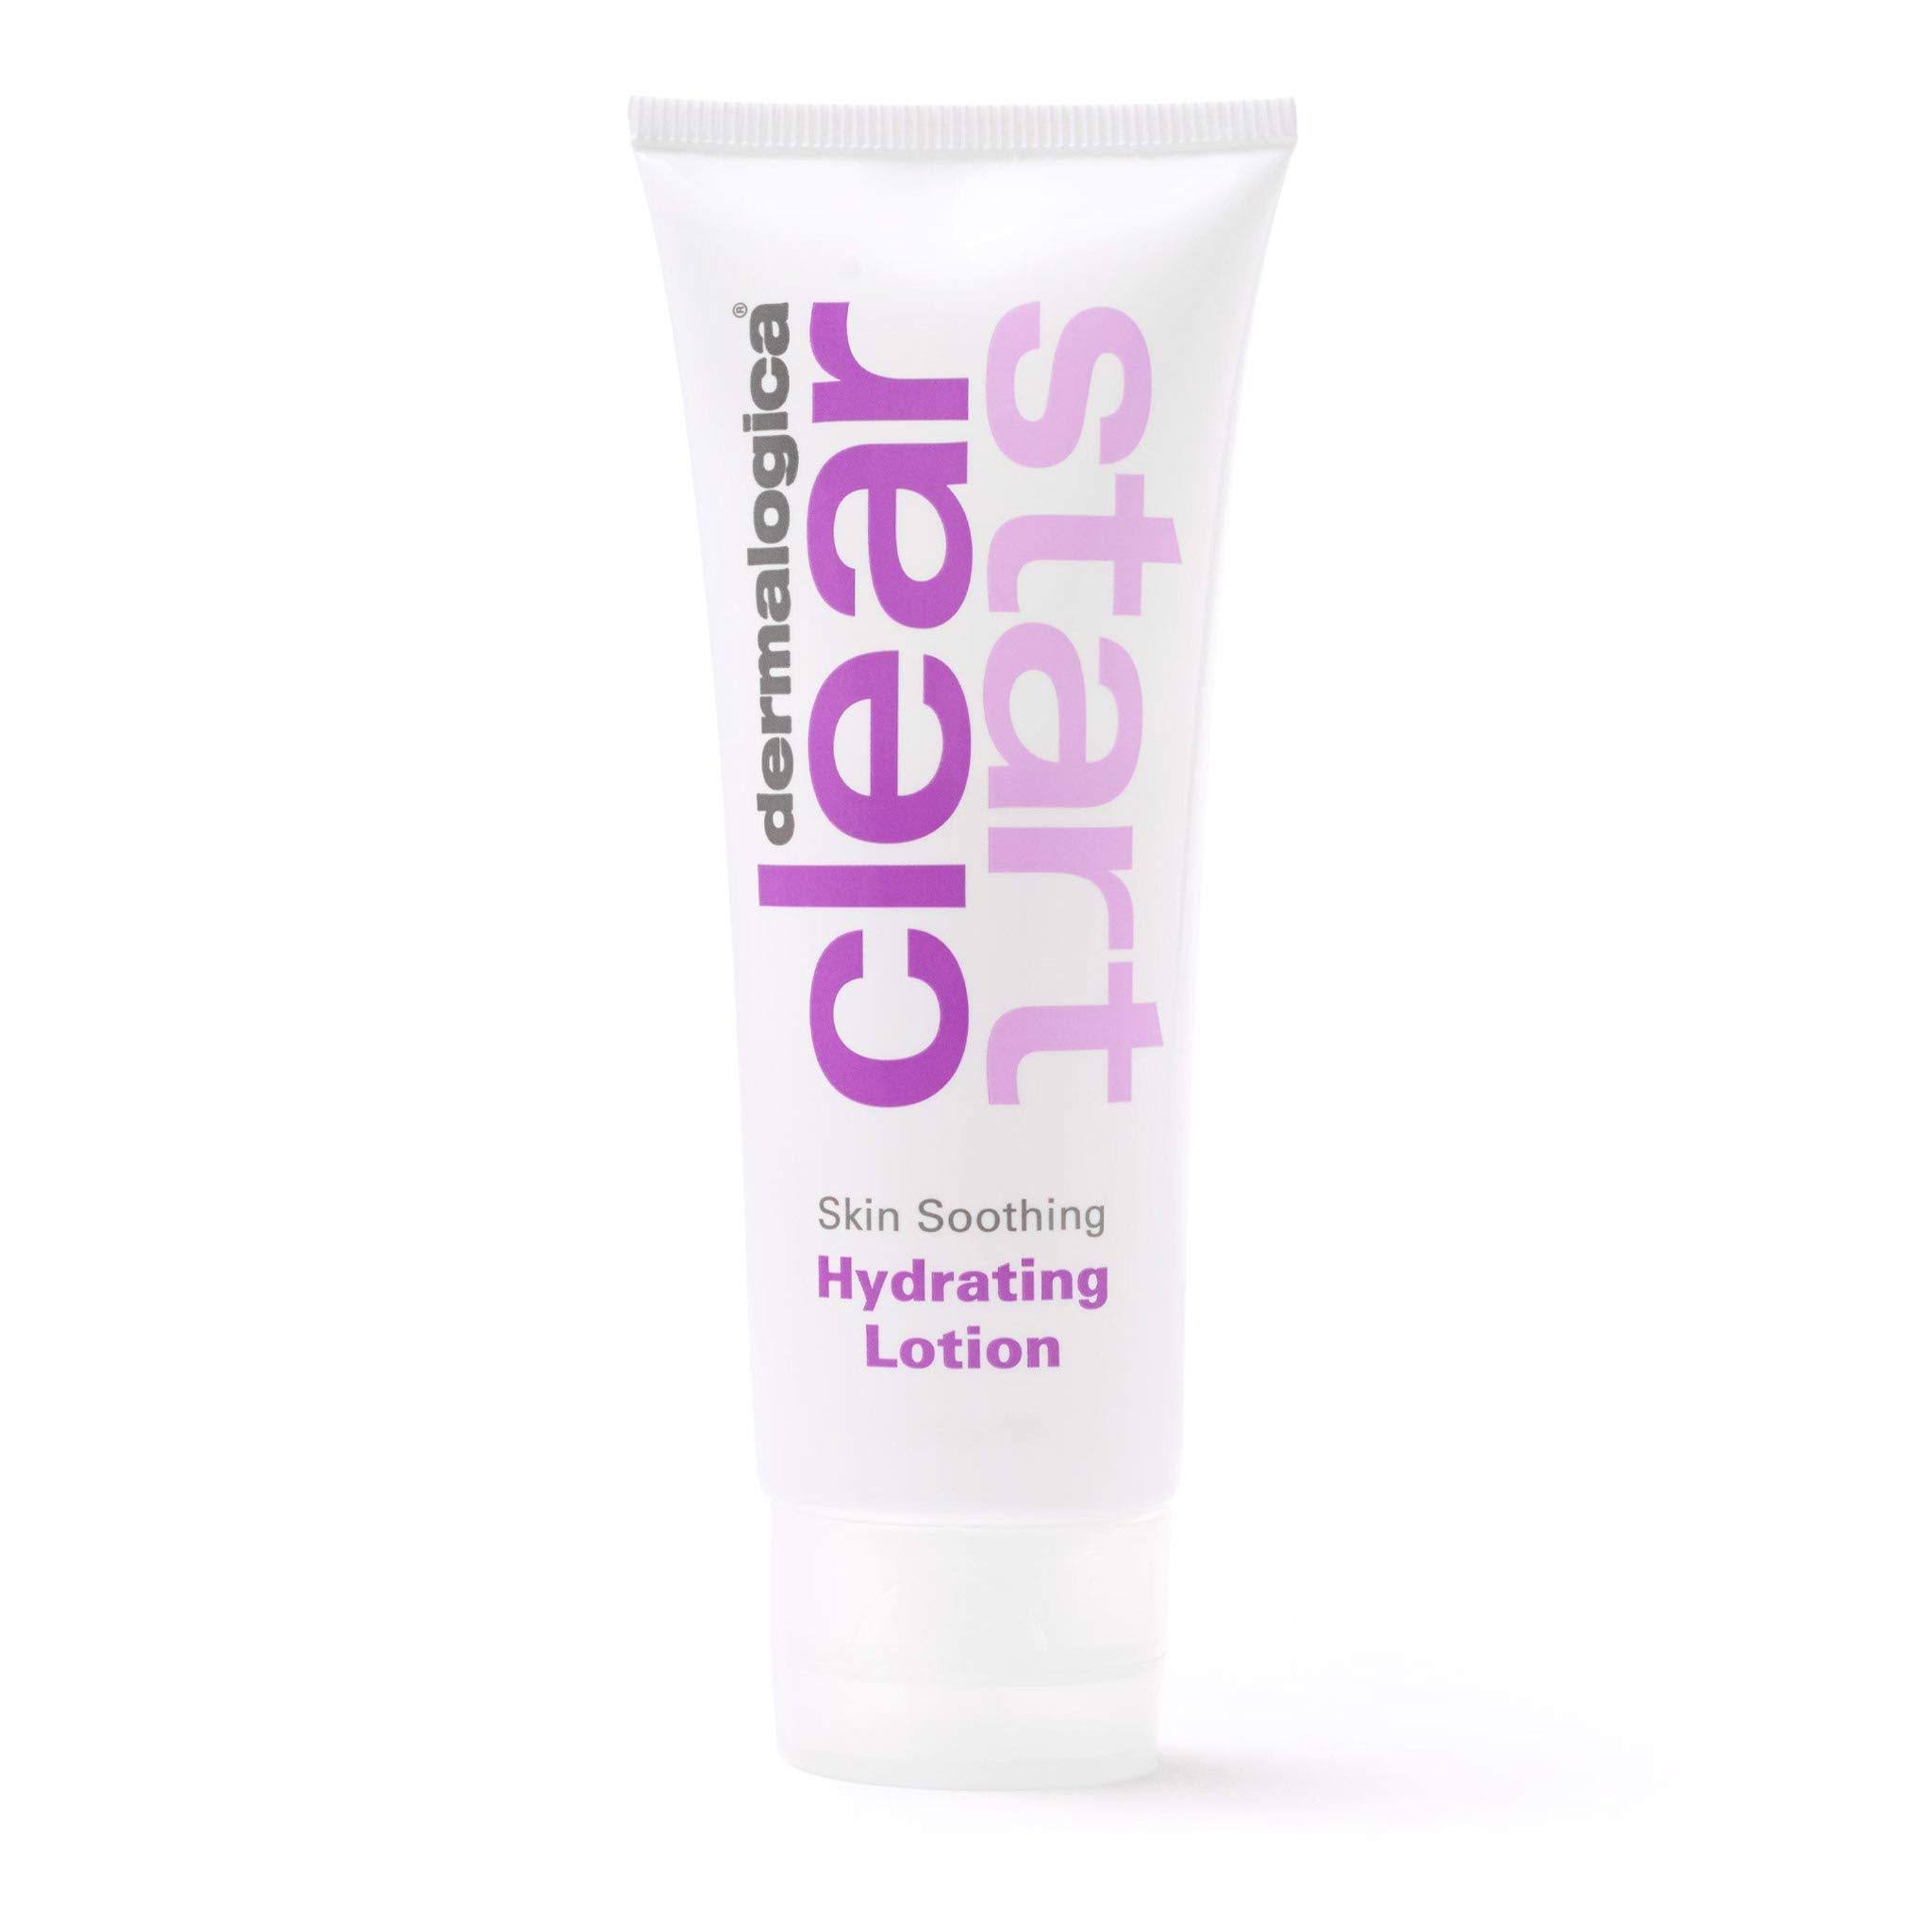 Clear Start Skin Soothing Hydrating Lotion | Dermalogica